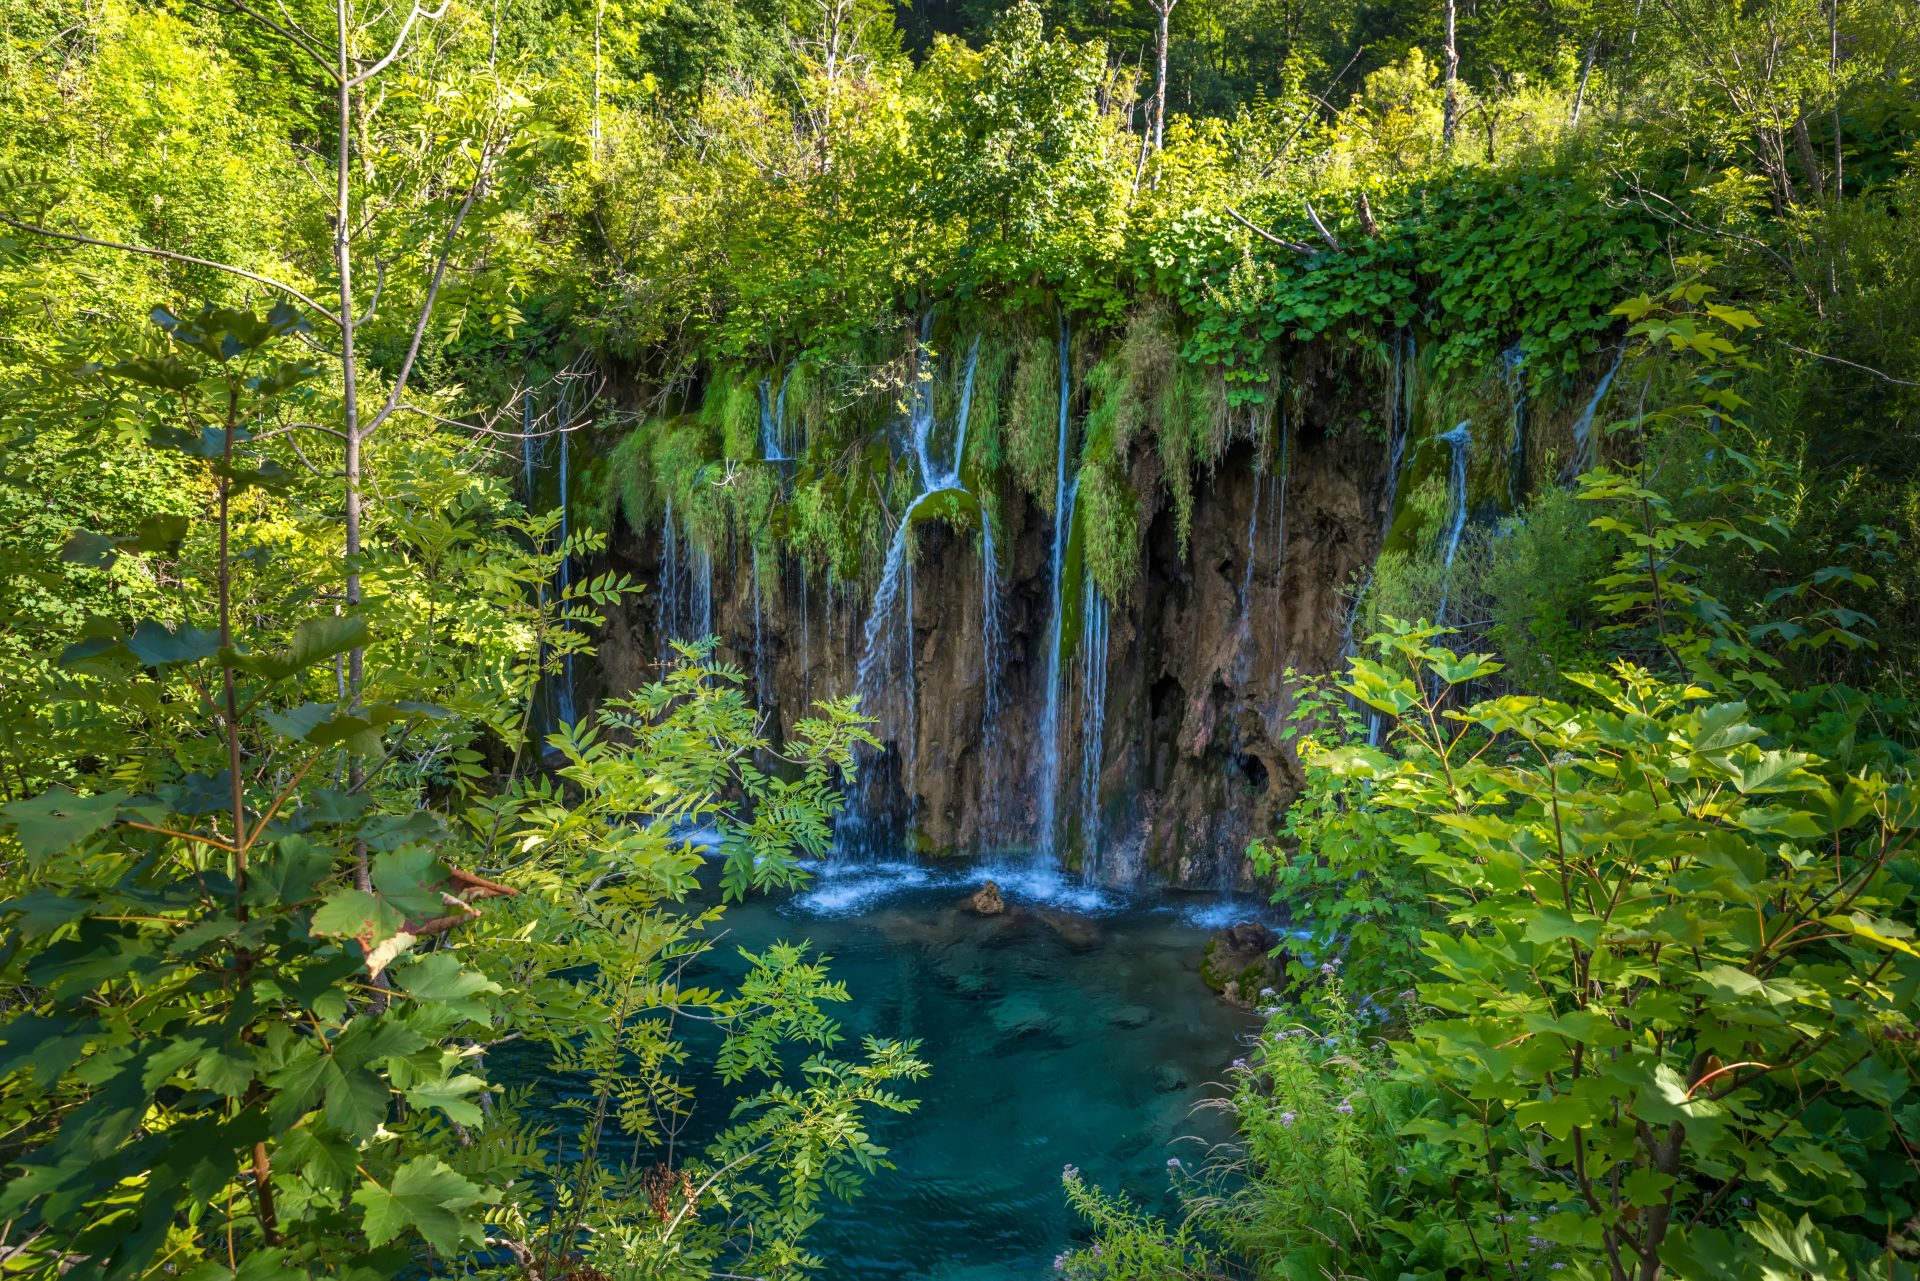 The great waterfall at Plitvice Lakes National Park in Croatia